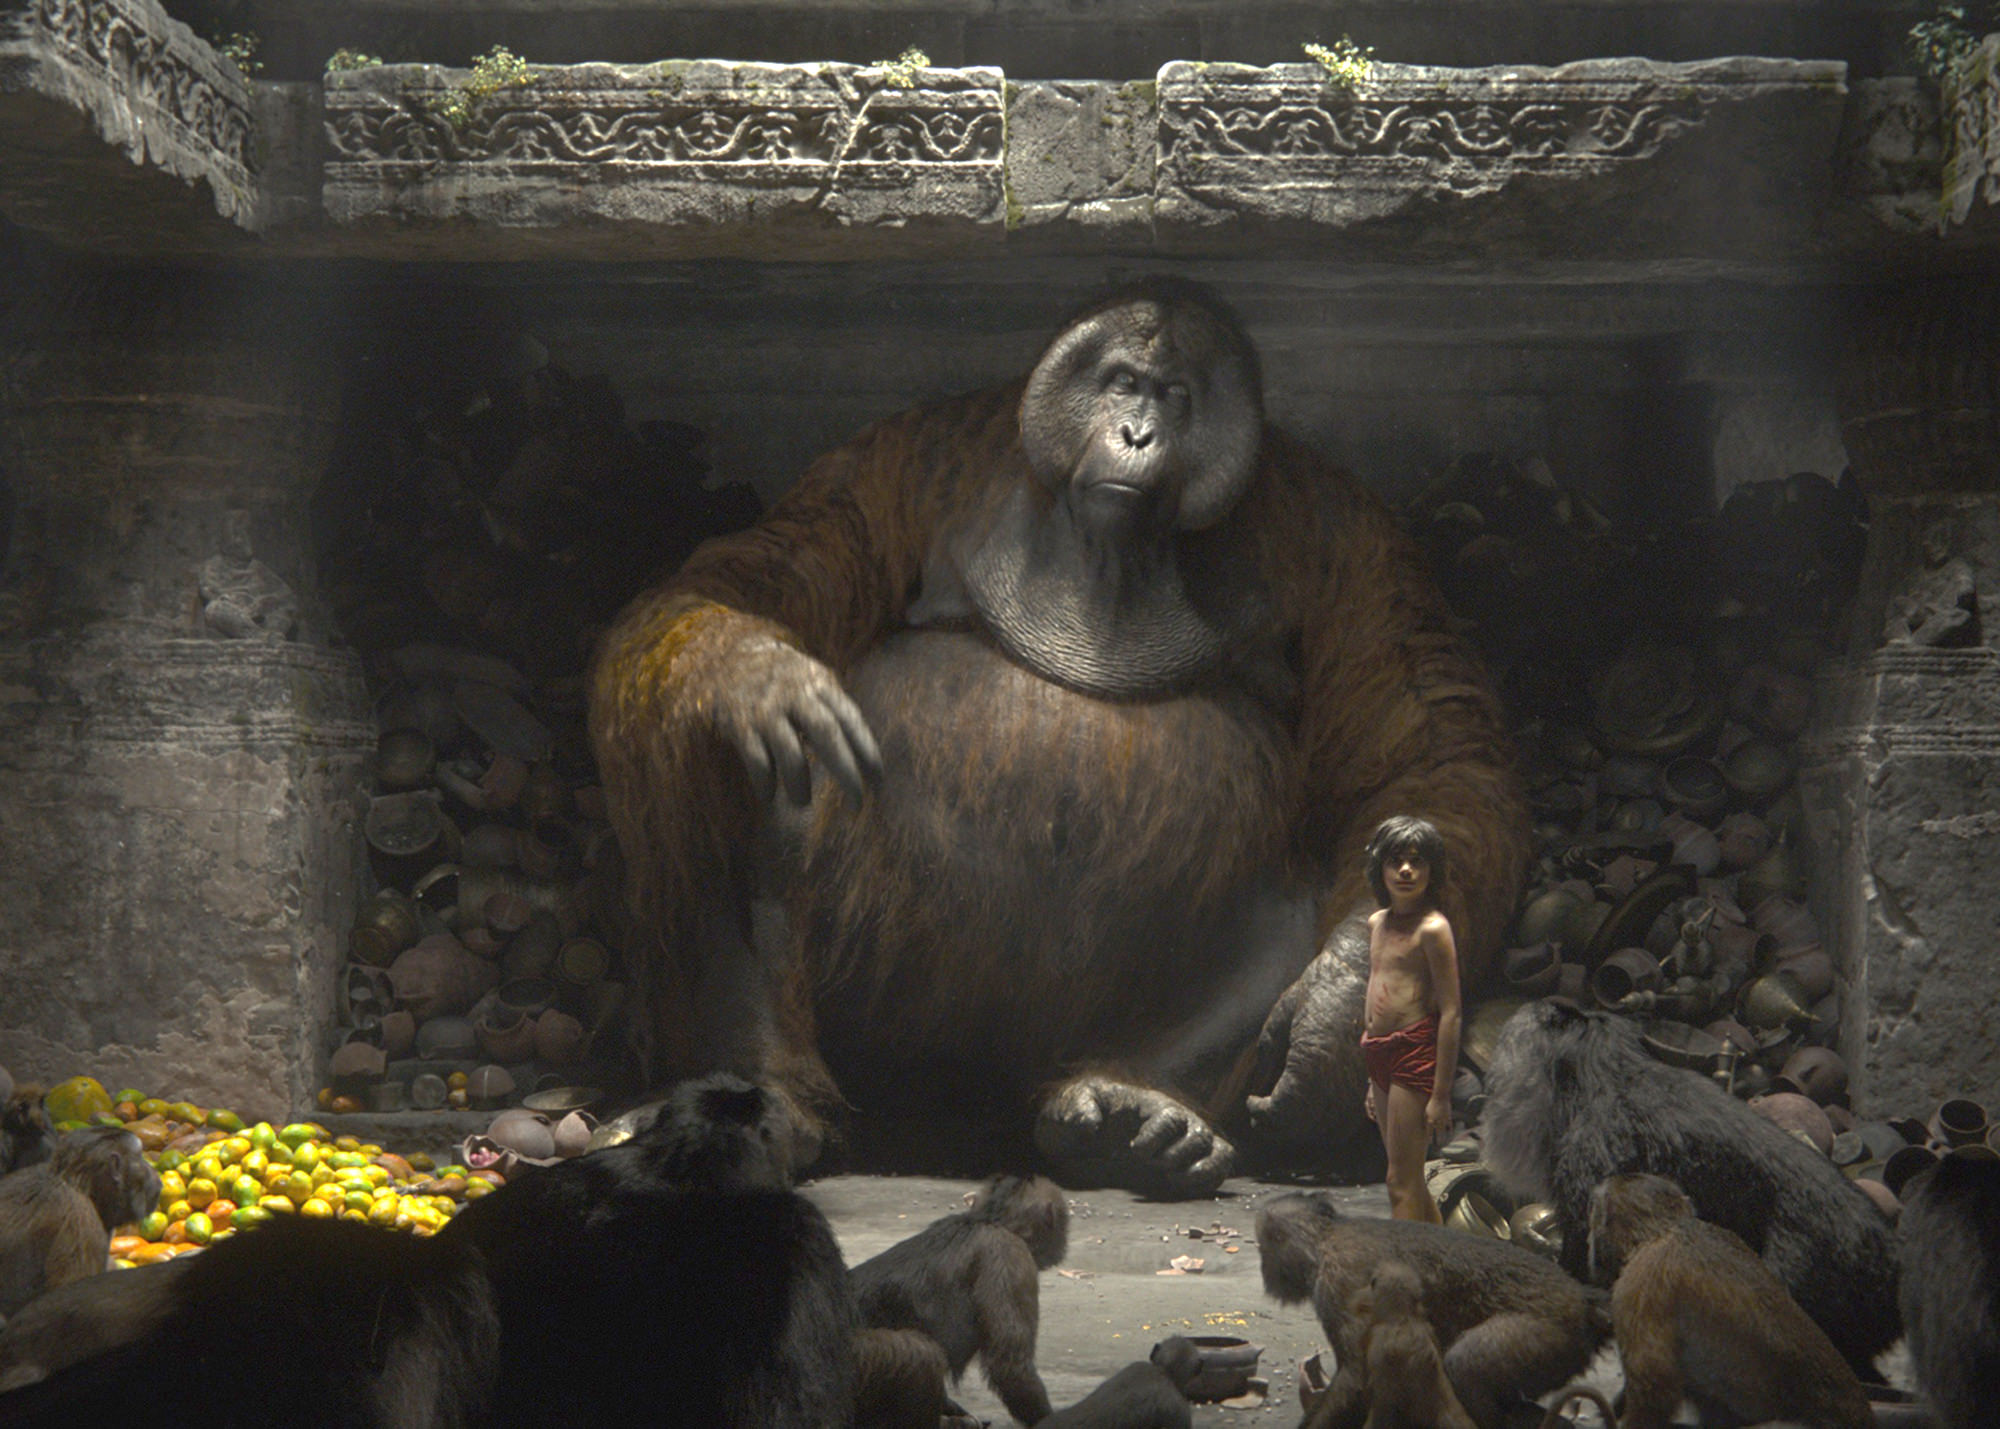 Rebooted Jungle Book an occasionally nostalgic retelling